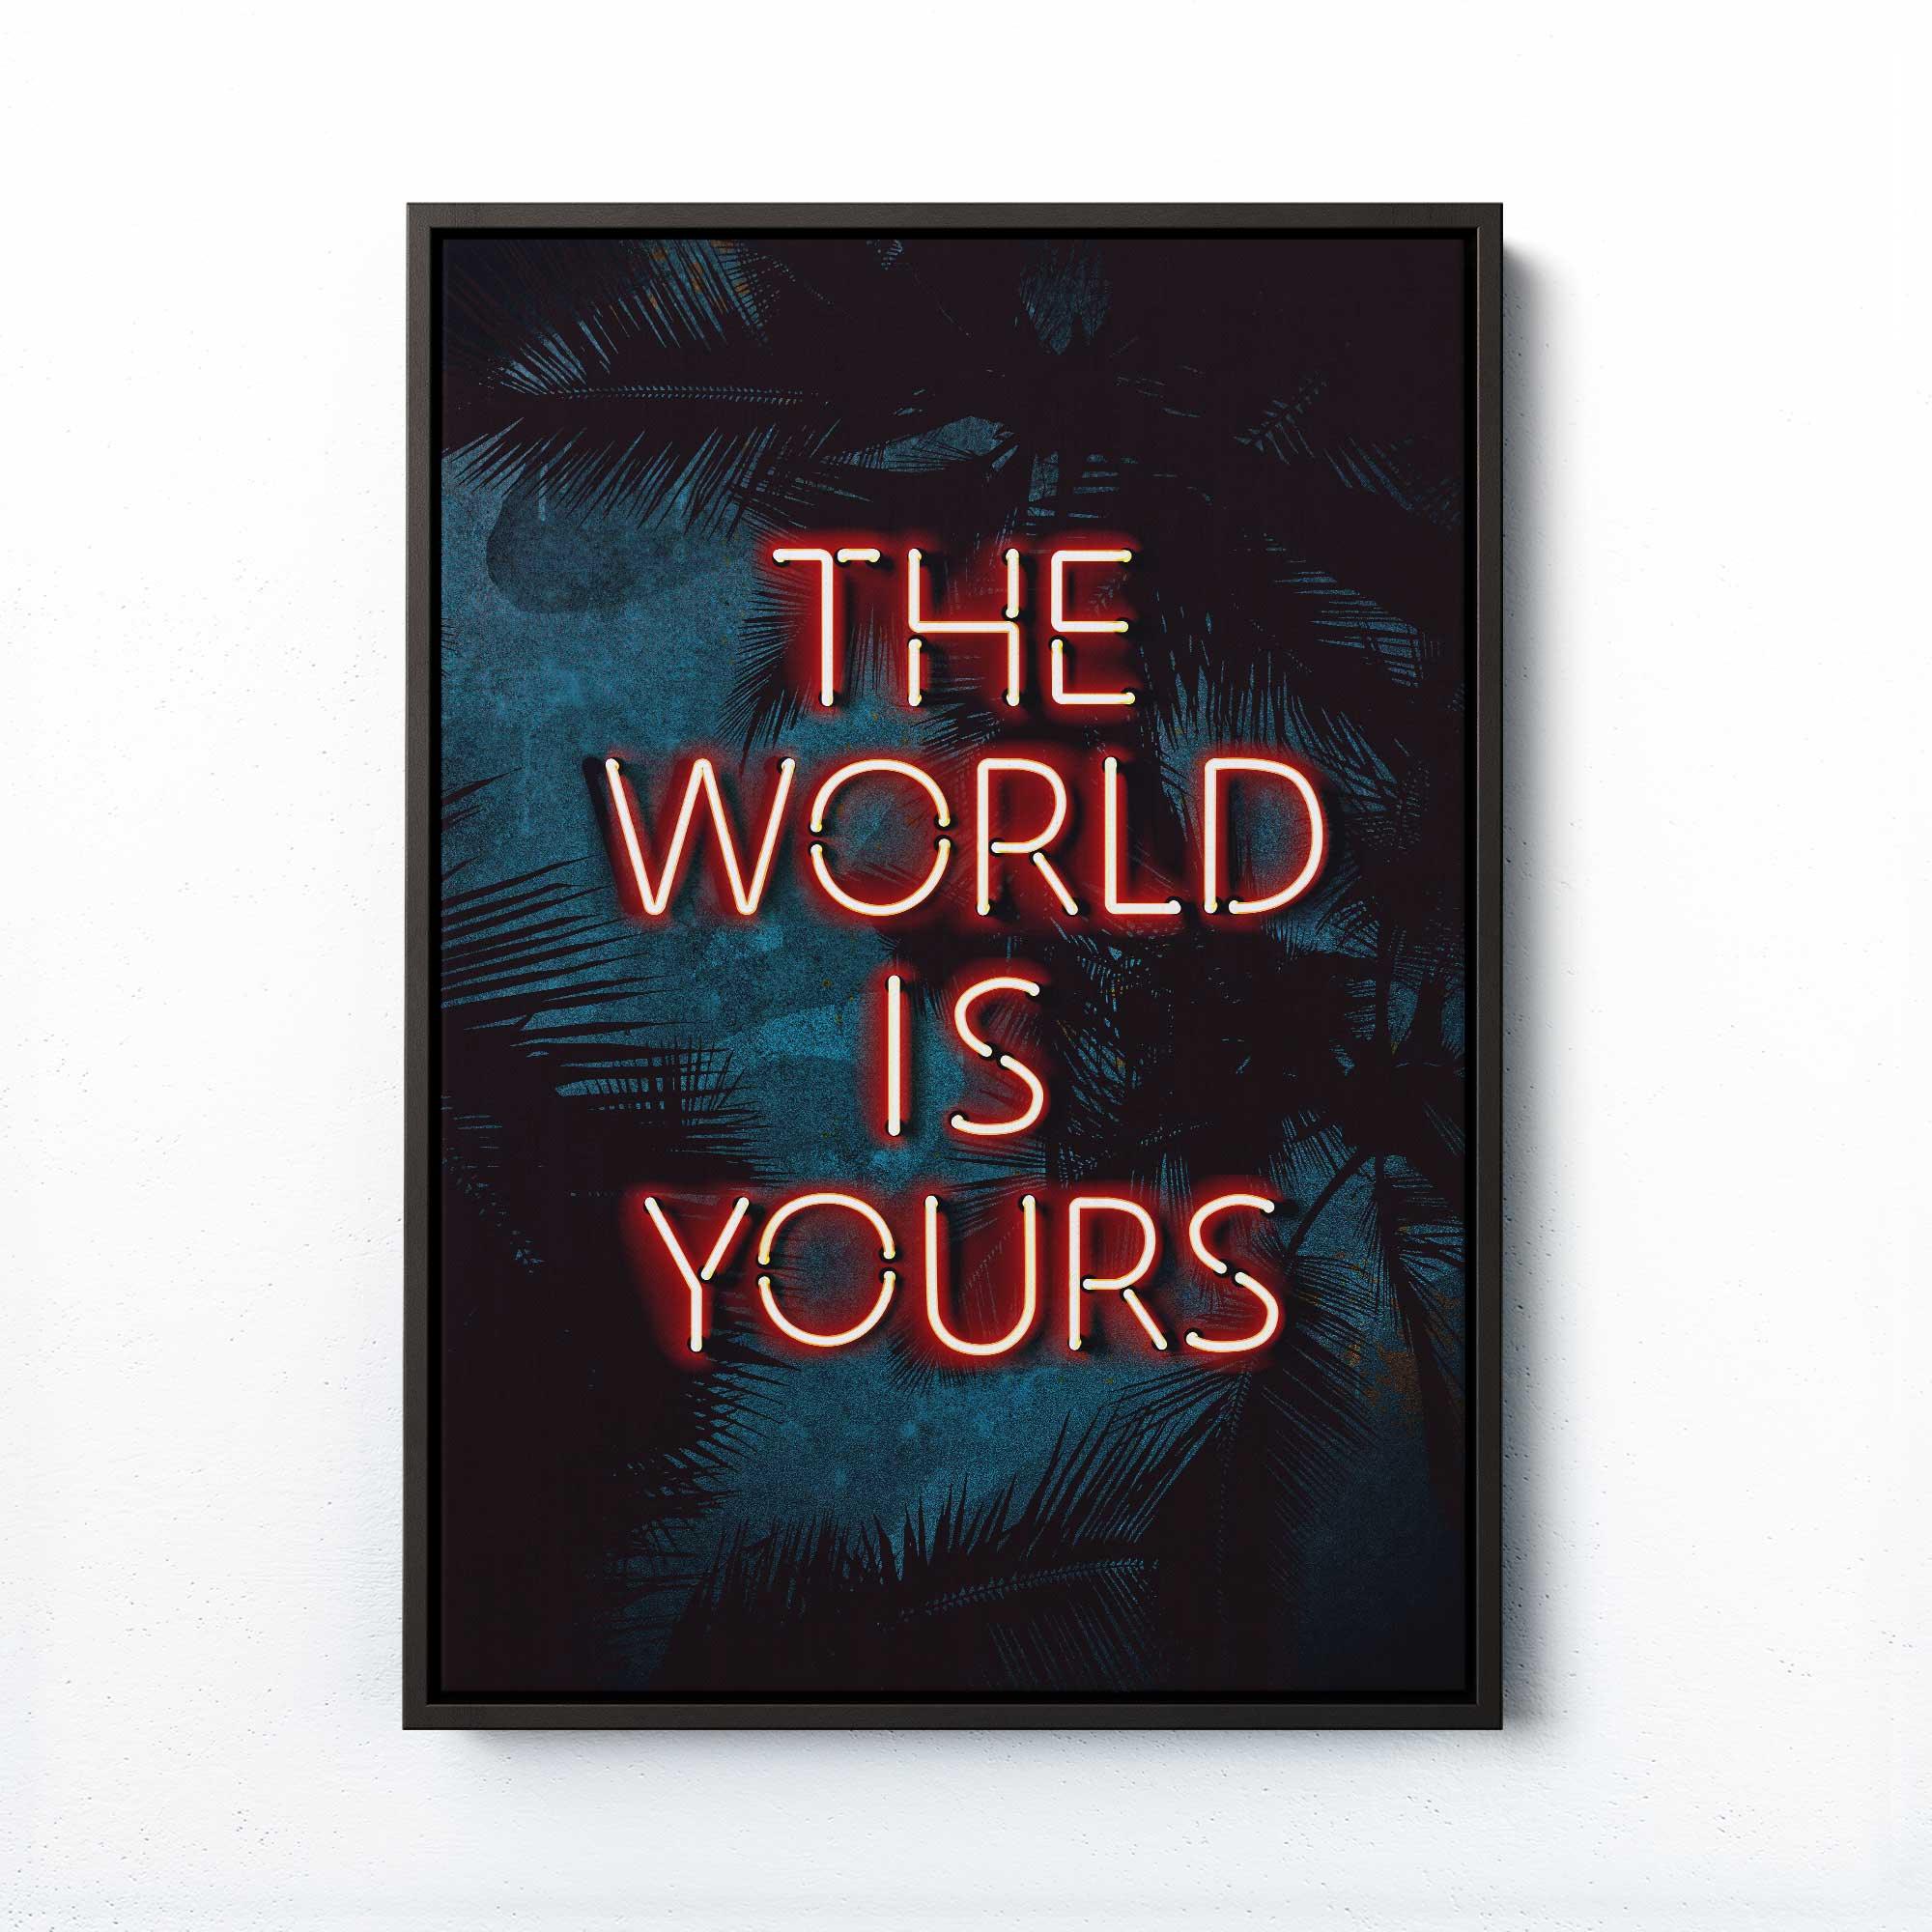 Scarface - The World Is Yours - Framed